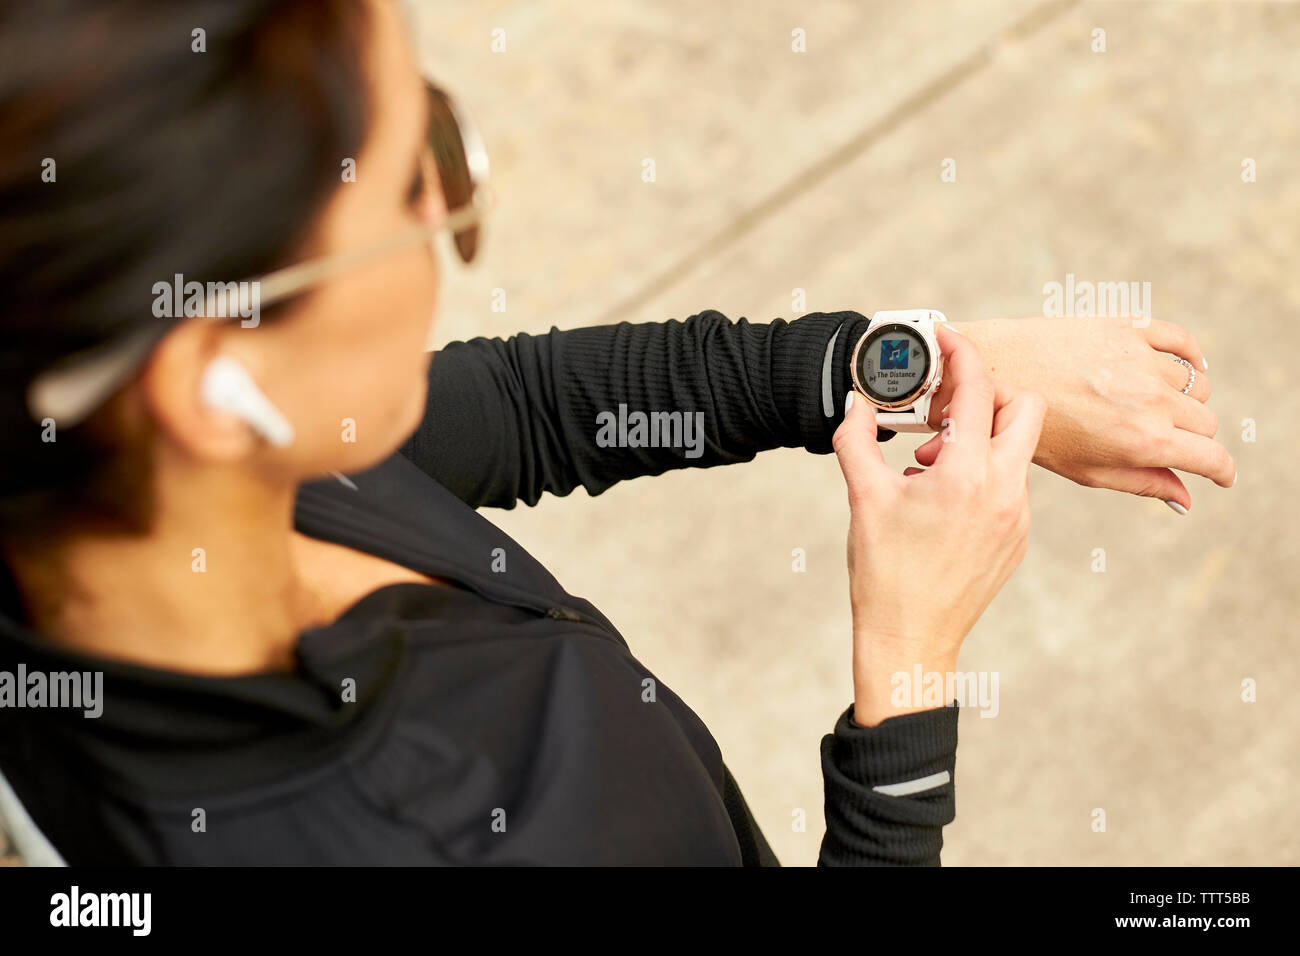 An overhead view of a woman selecting music on her smartwatch. Stock Photo